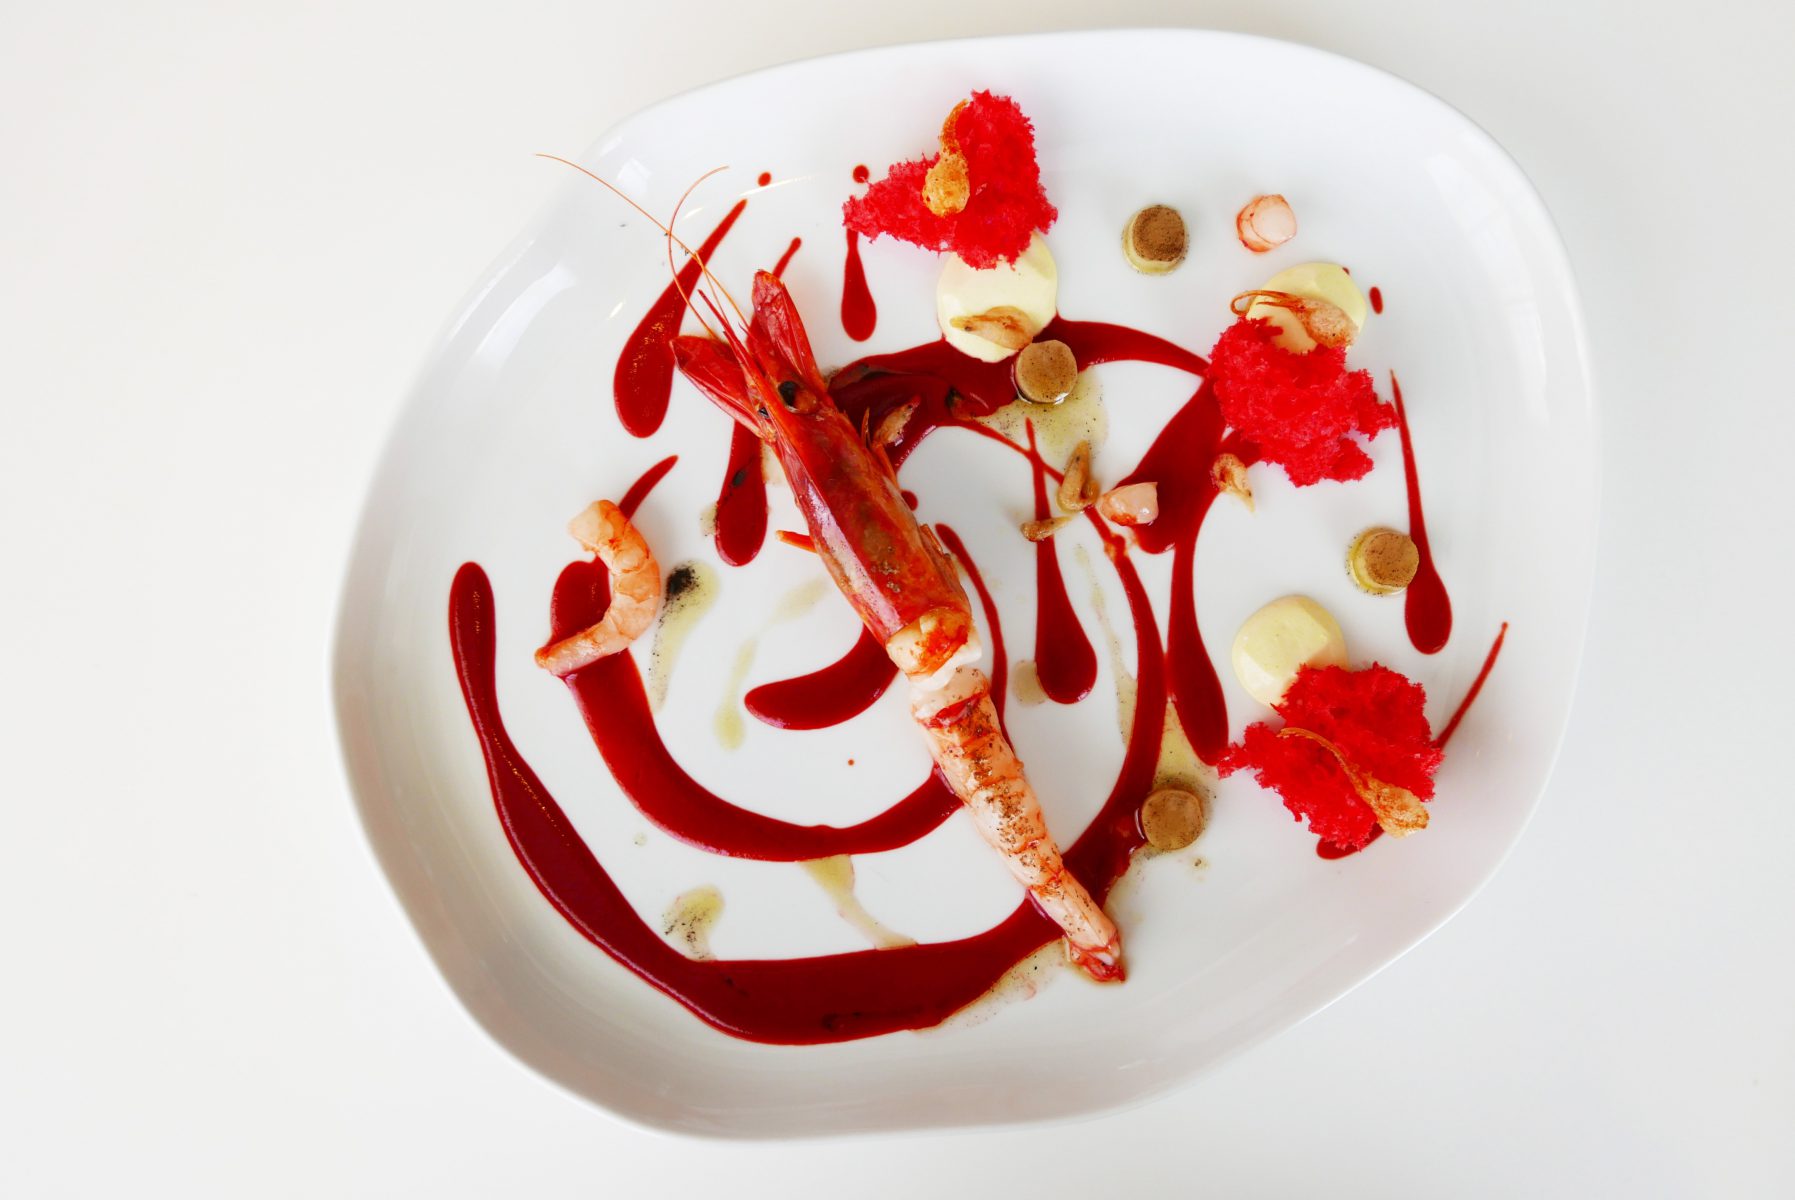 Chef Quique Dacosta has created dozens of recipes with gamba roja over his career. This one with kimchi sauce and aioli is one of his latest.